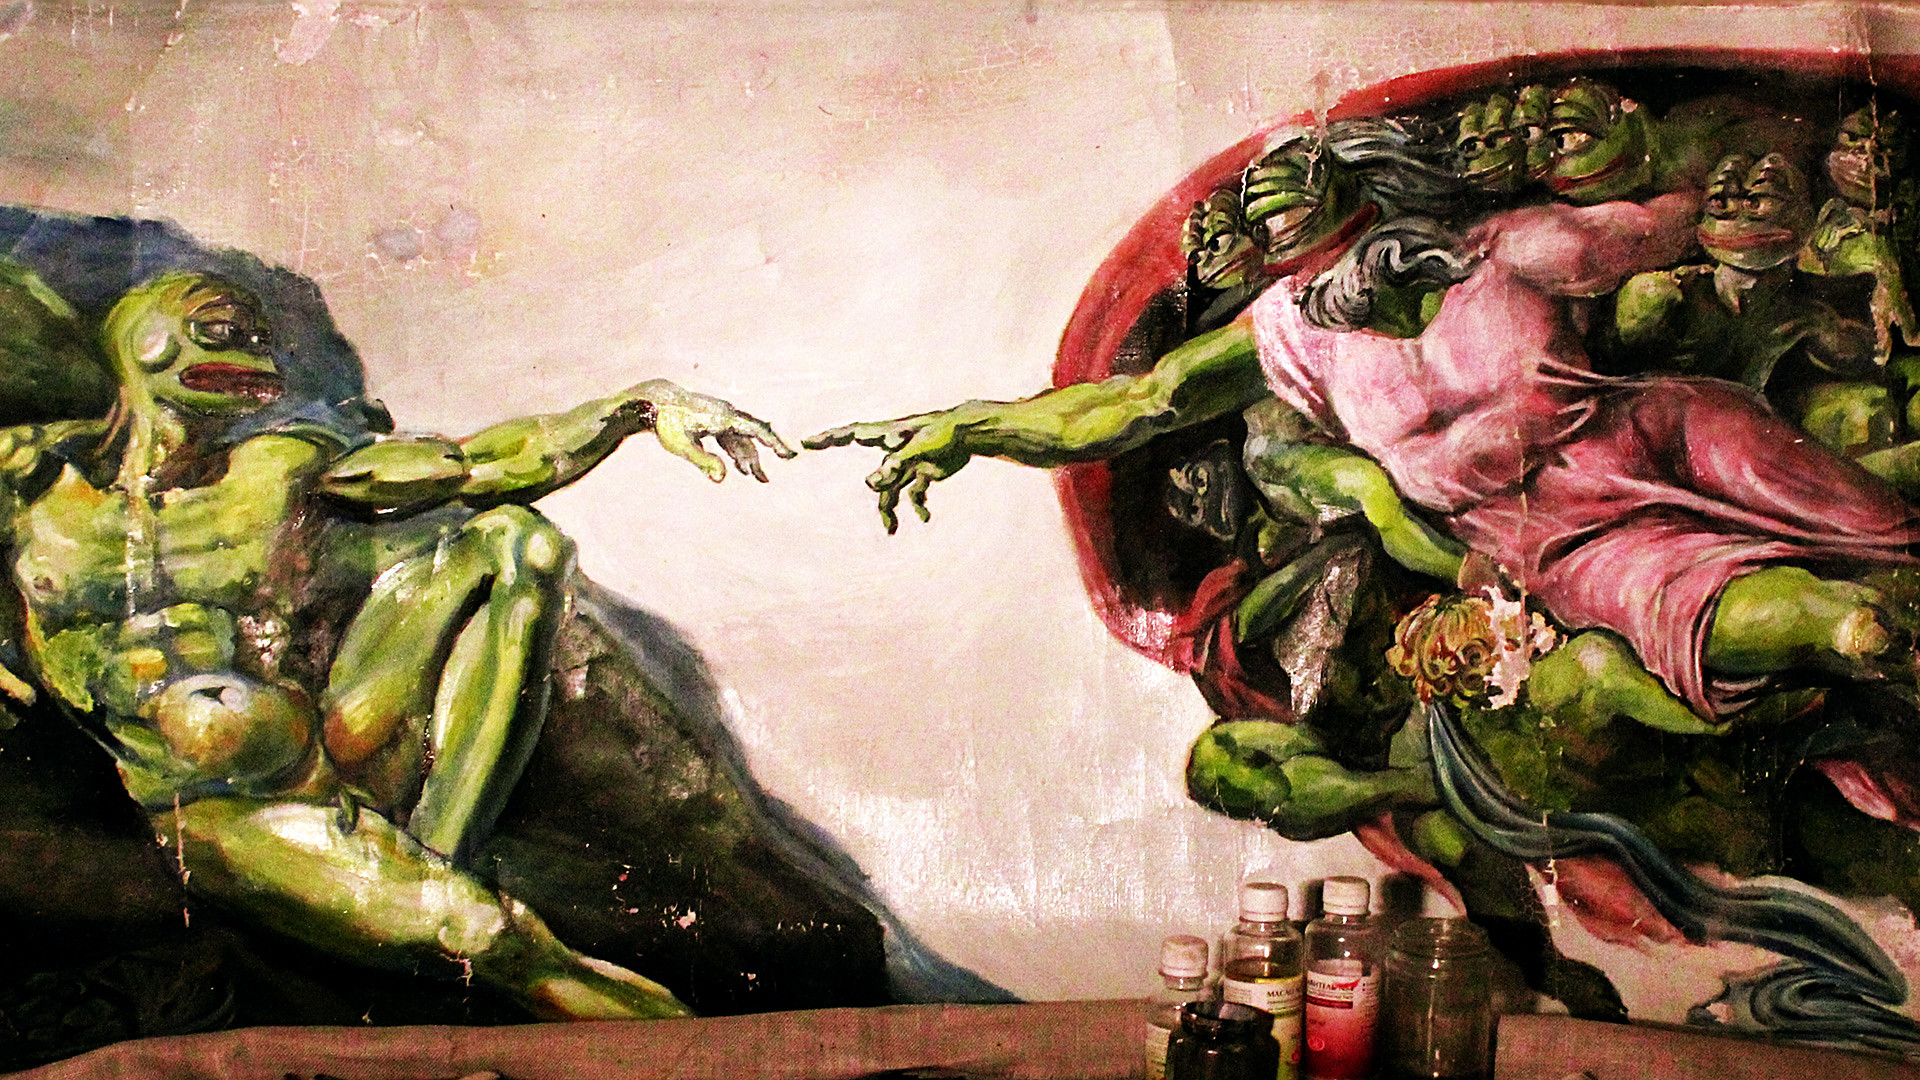 The Creation of Pepe by Olga Vishnevsky (based on Michelangelo's The Creation of Adam).